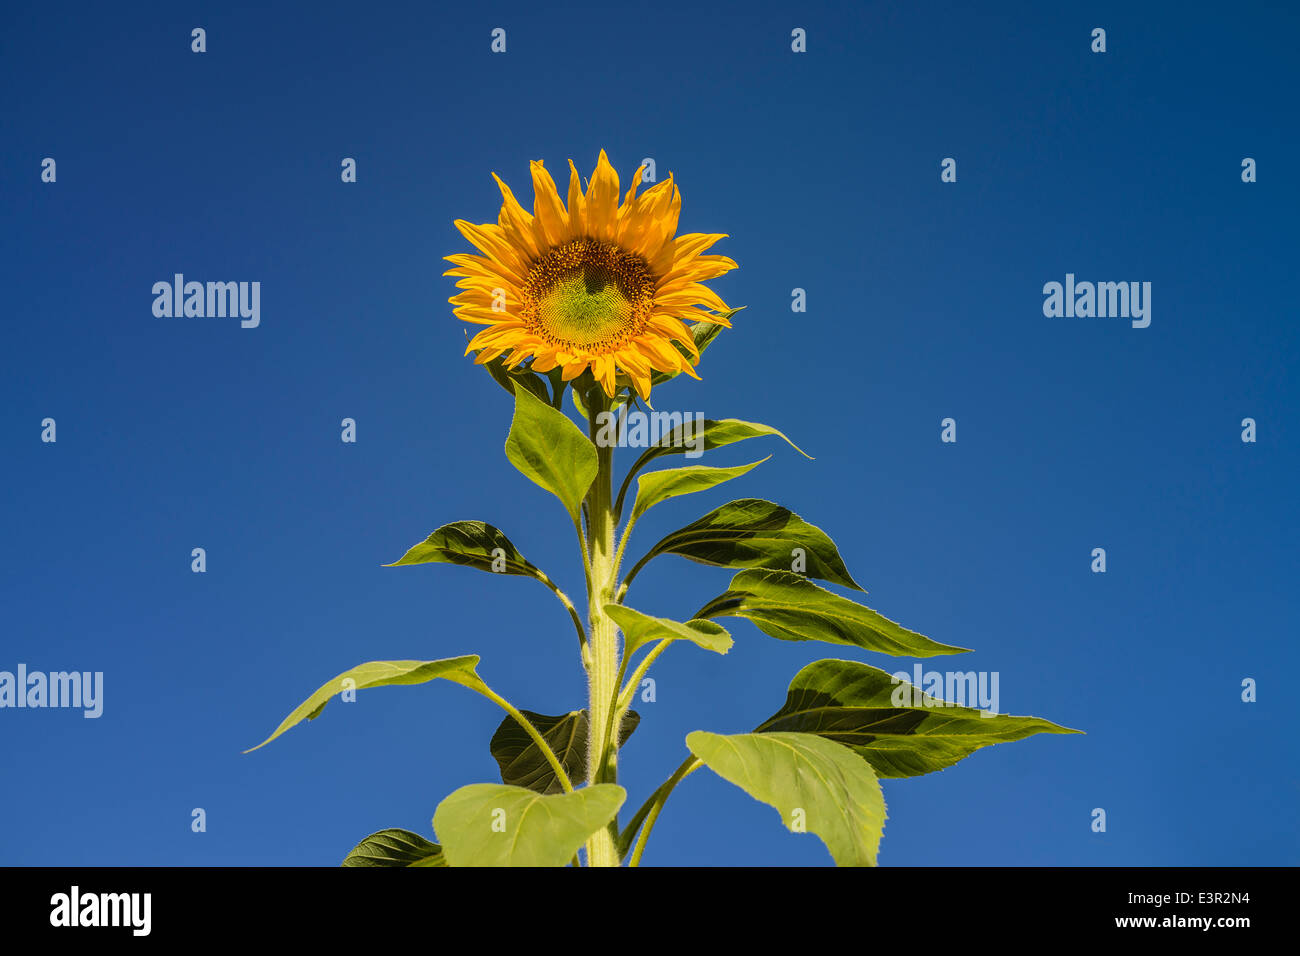 A close-up of a yellow sunflower that stands against a deep blue sky in Santa Barbara, California. Stock Photo